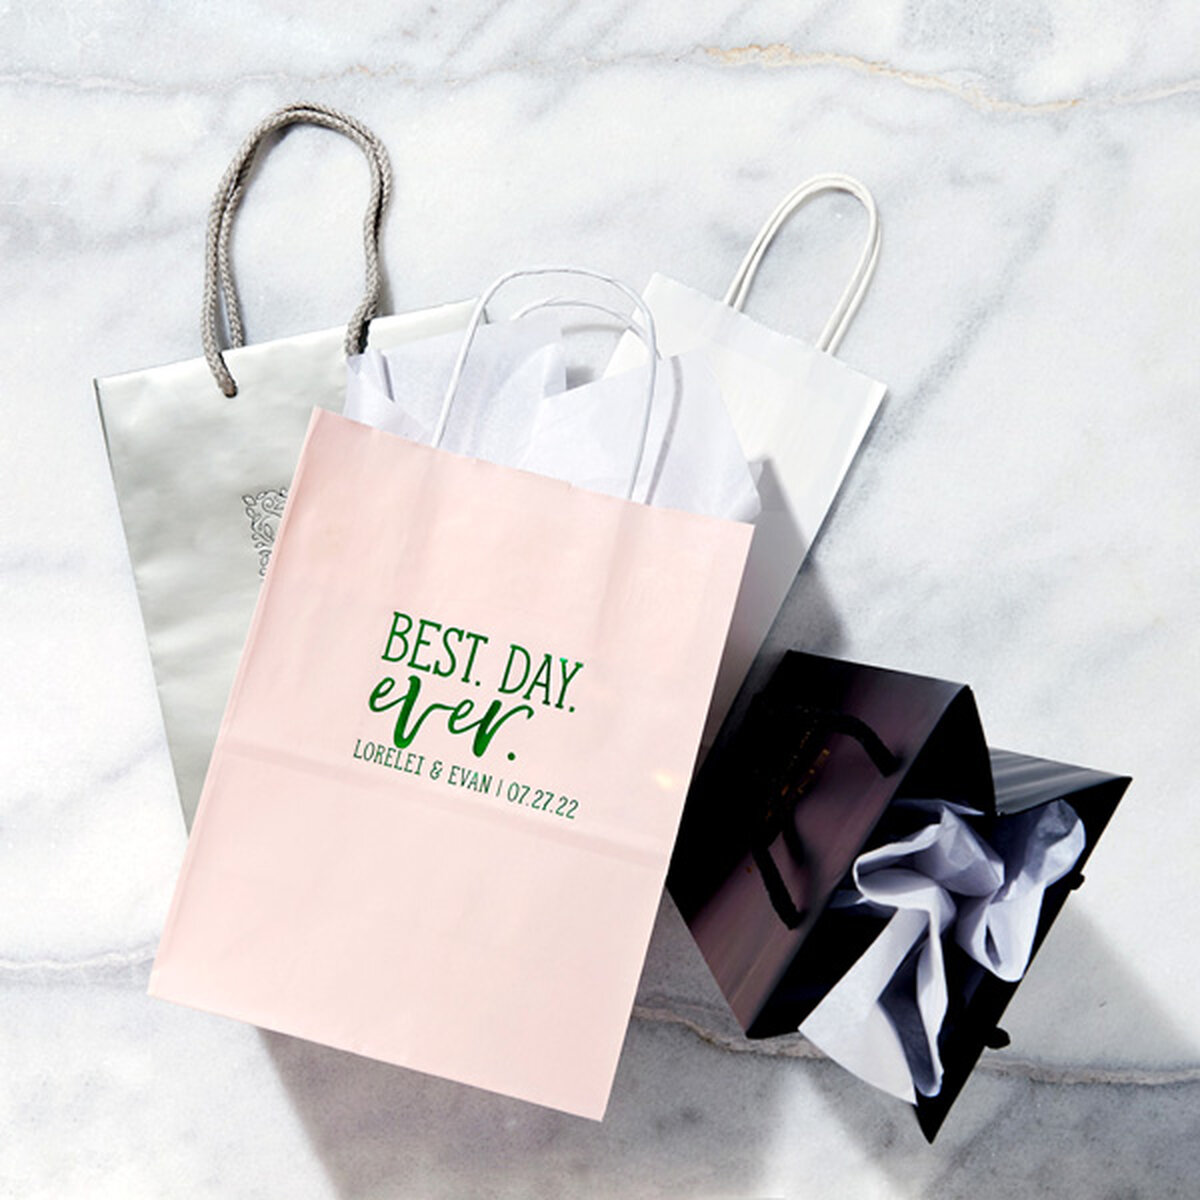 Hammont - Coffee Gift Bags With Ribbon 9 x 7 x 4 - 12 Pack